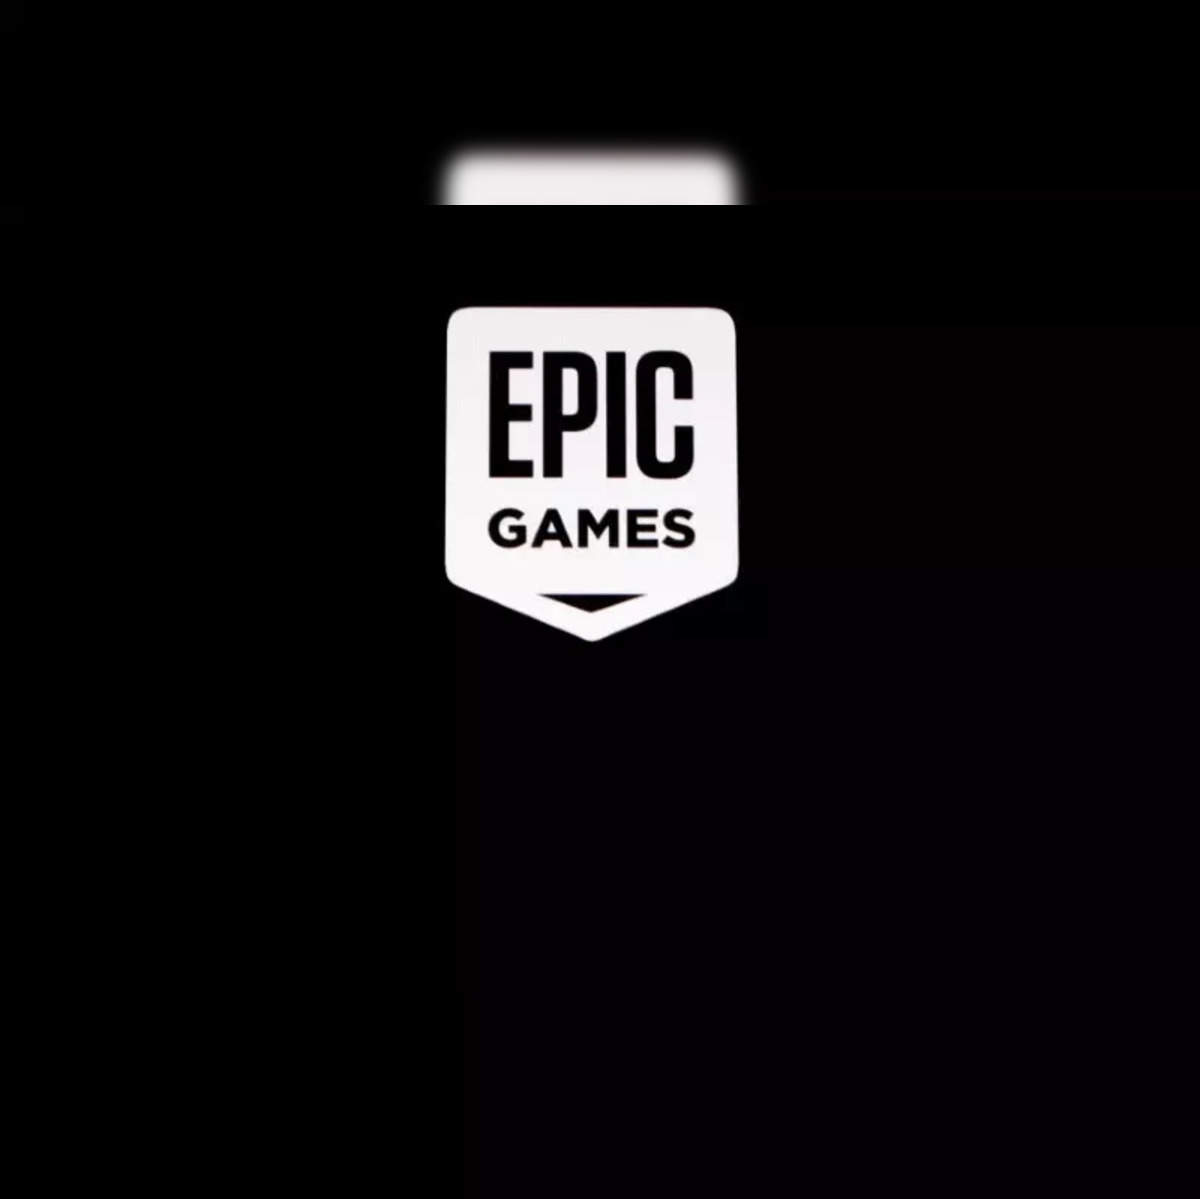 How To Claim 15 Free Games From The Epic Games Store! 